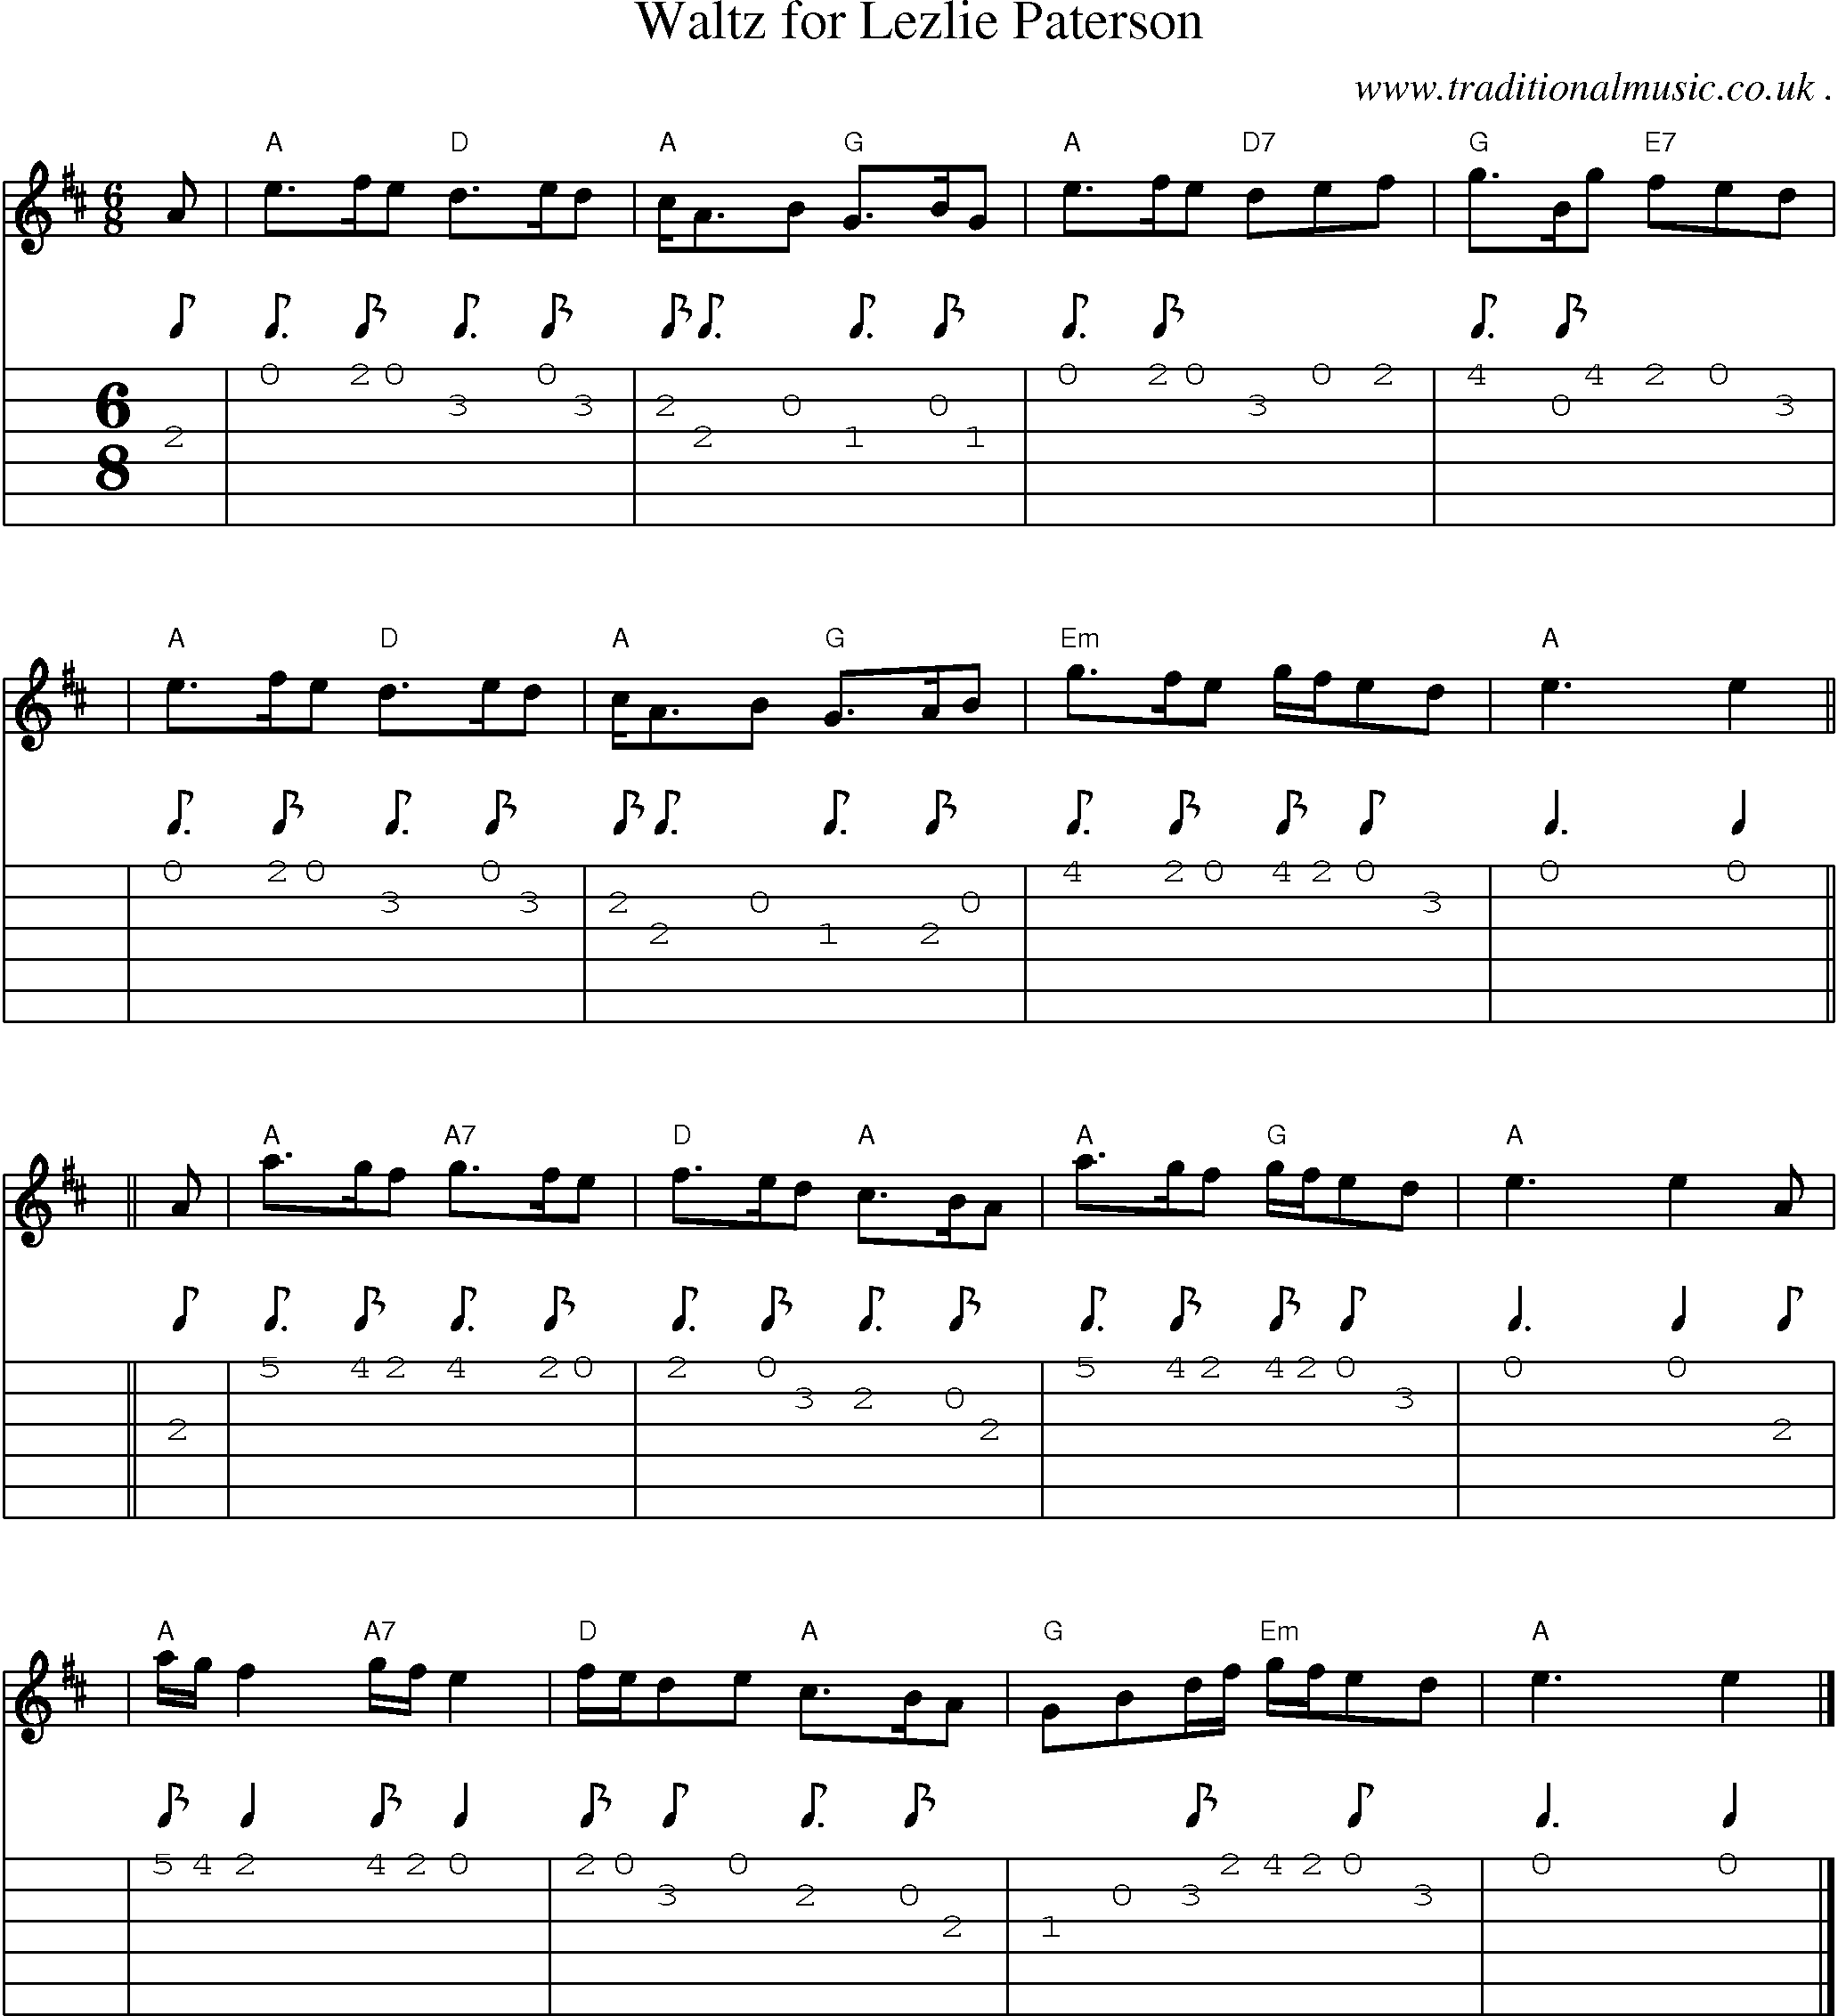 Sheet-music  score, Chords and Guitar Tabs for Waltz For Lezlie Paterson